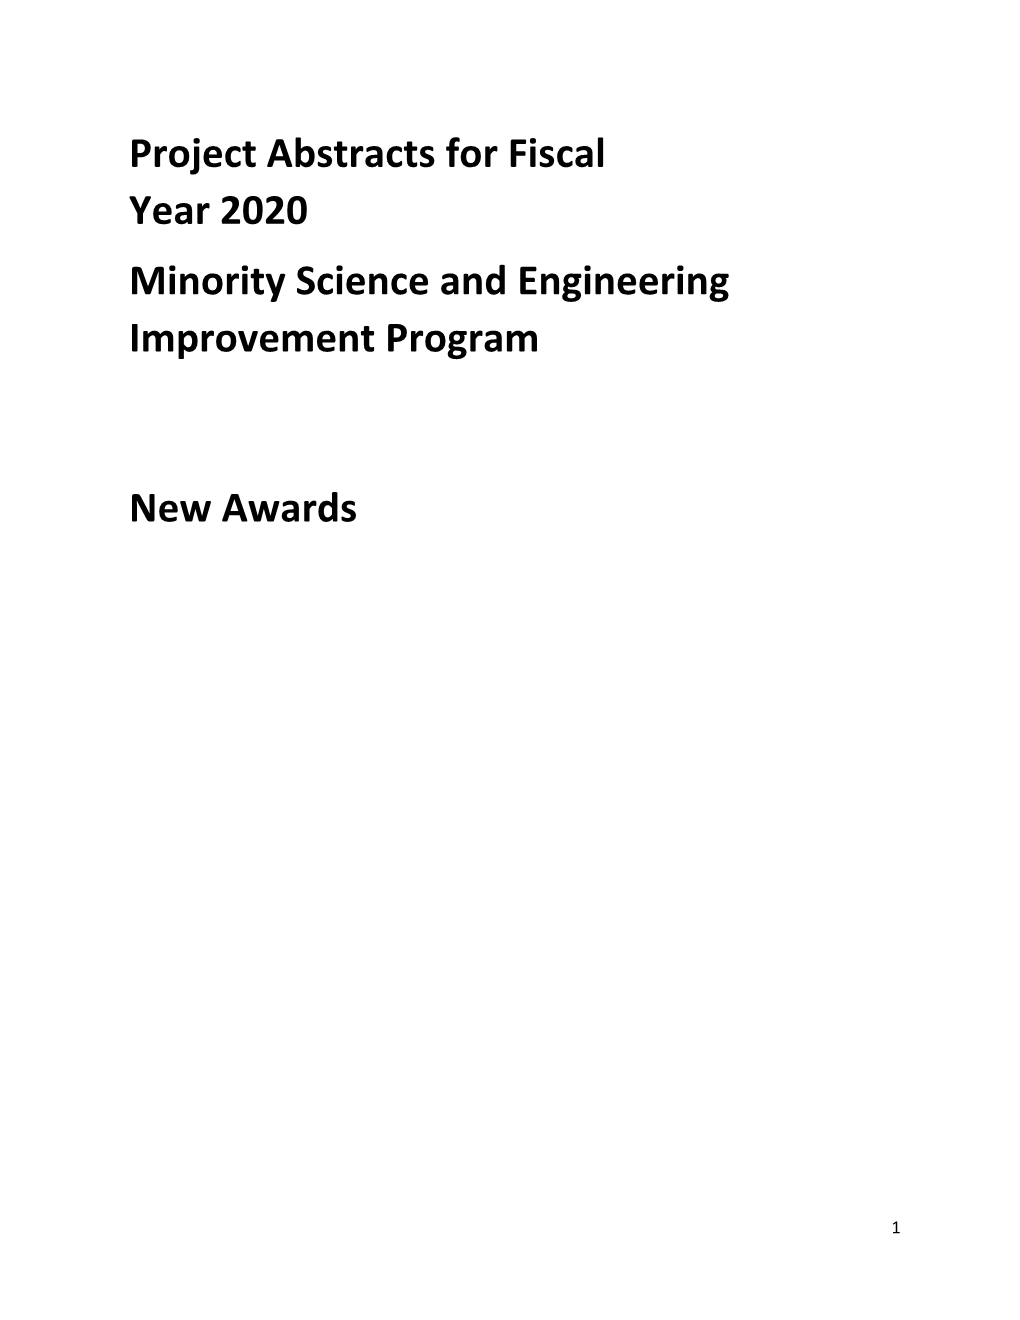 Project Abstracts for Fiscal Year 2020 Minority Science and Engineering Improvement Program